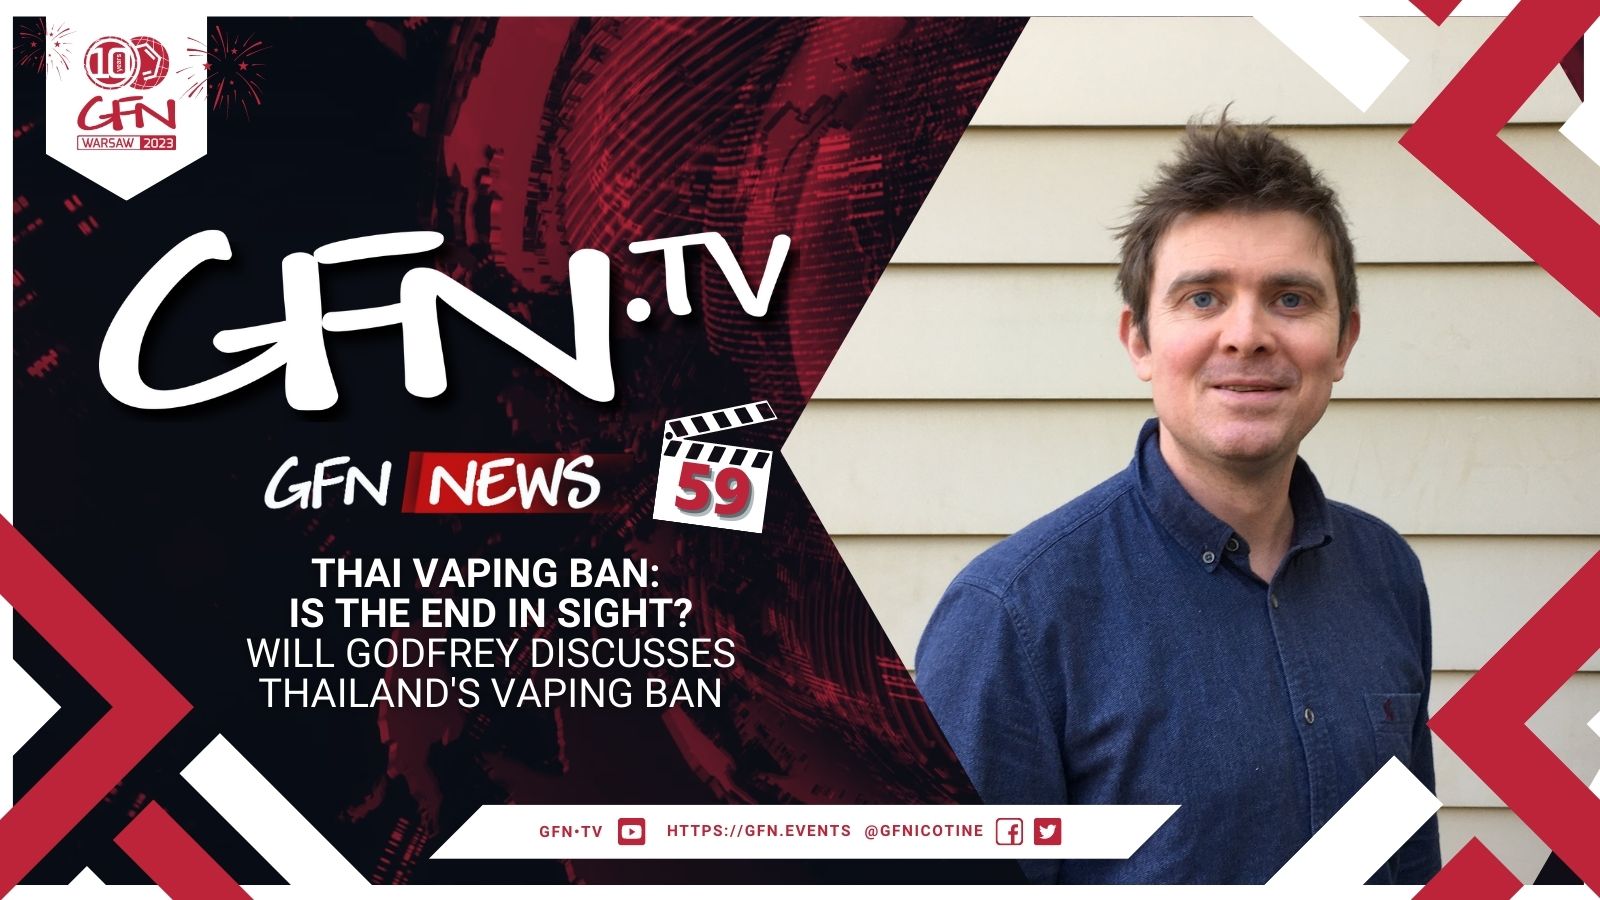 GFN News #59 | THAI VAPING BAN: IS THE END IN SIGHT? | Will Godfrey discusses Thailand's vaping ban